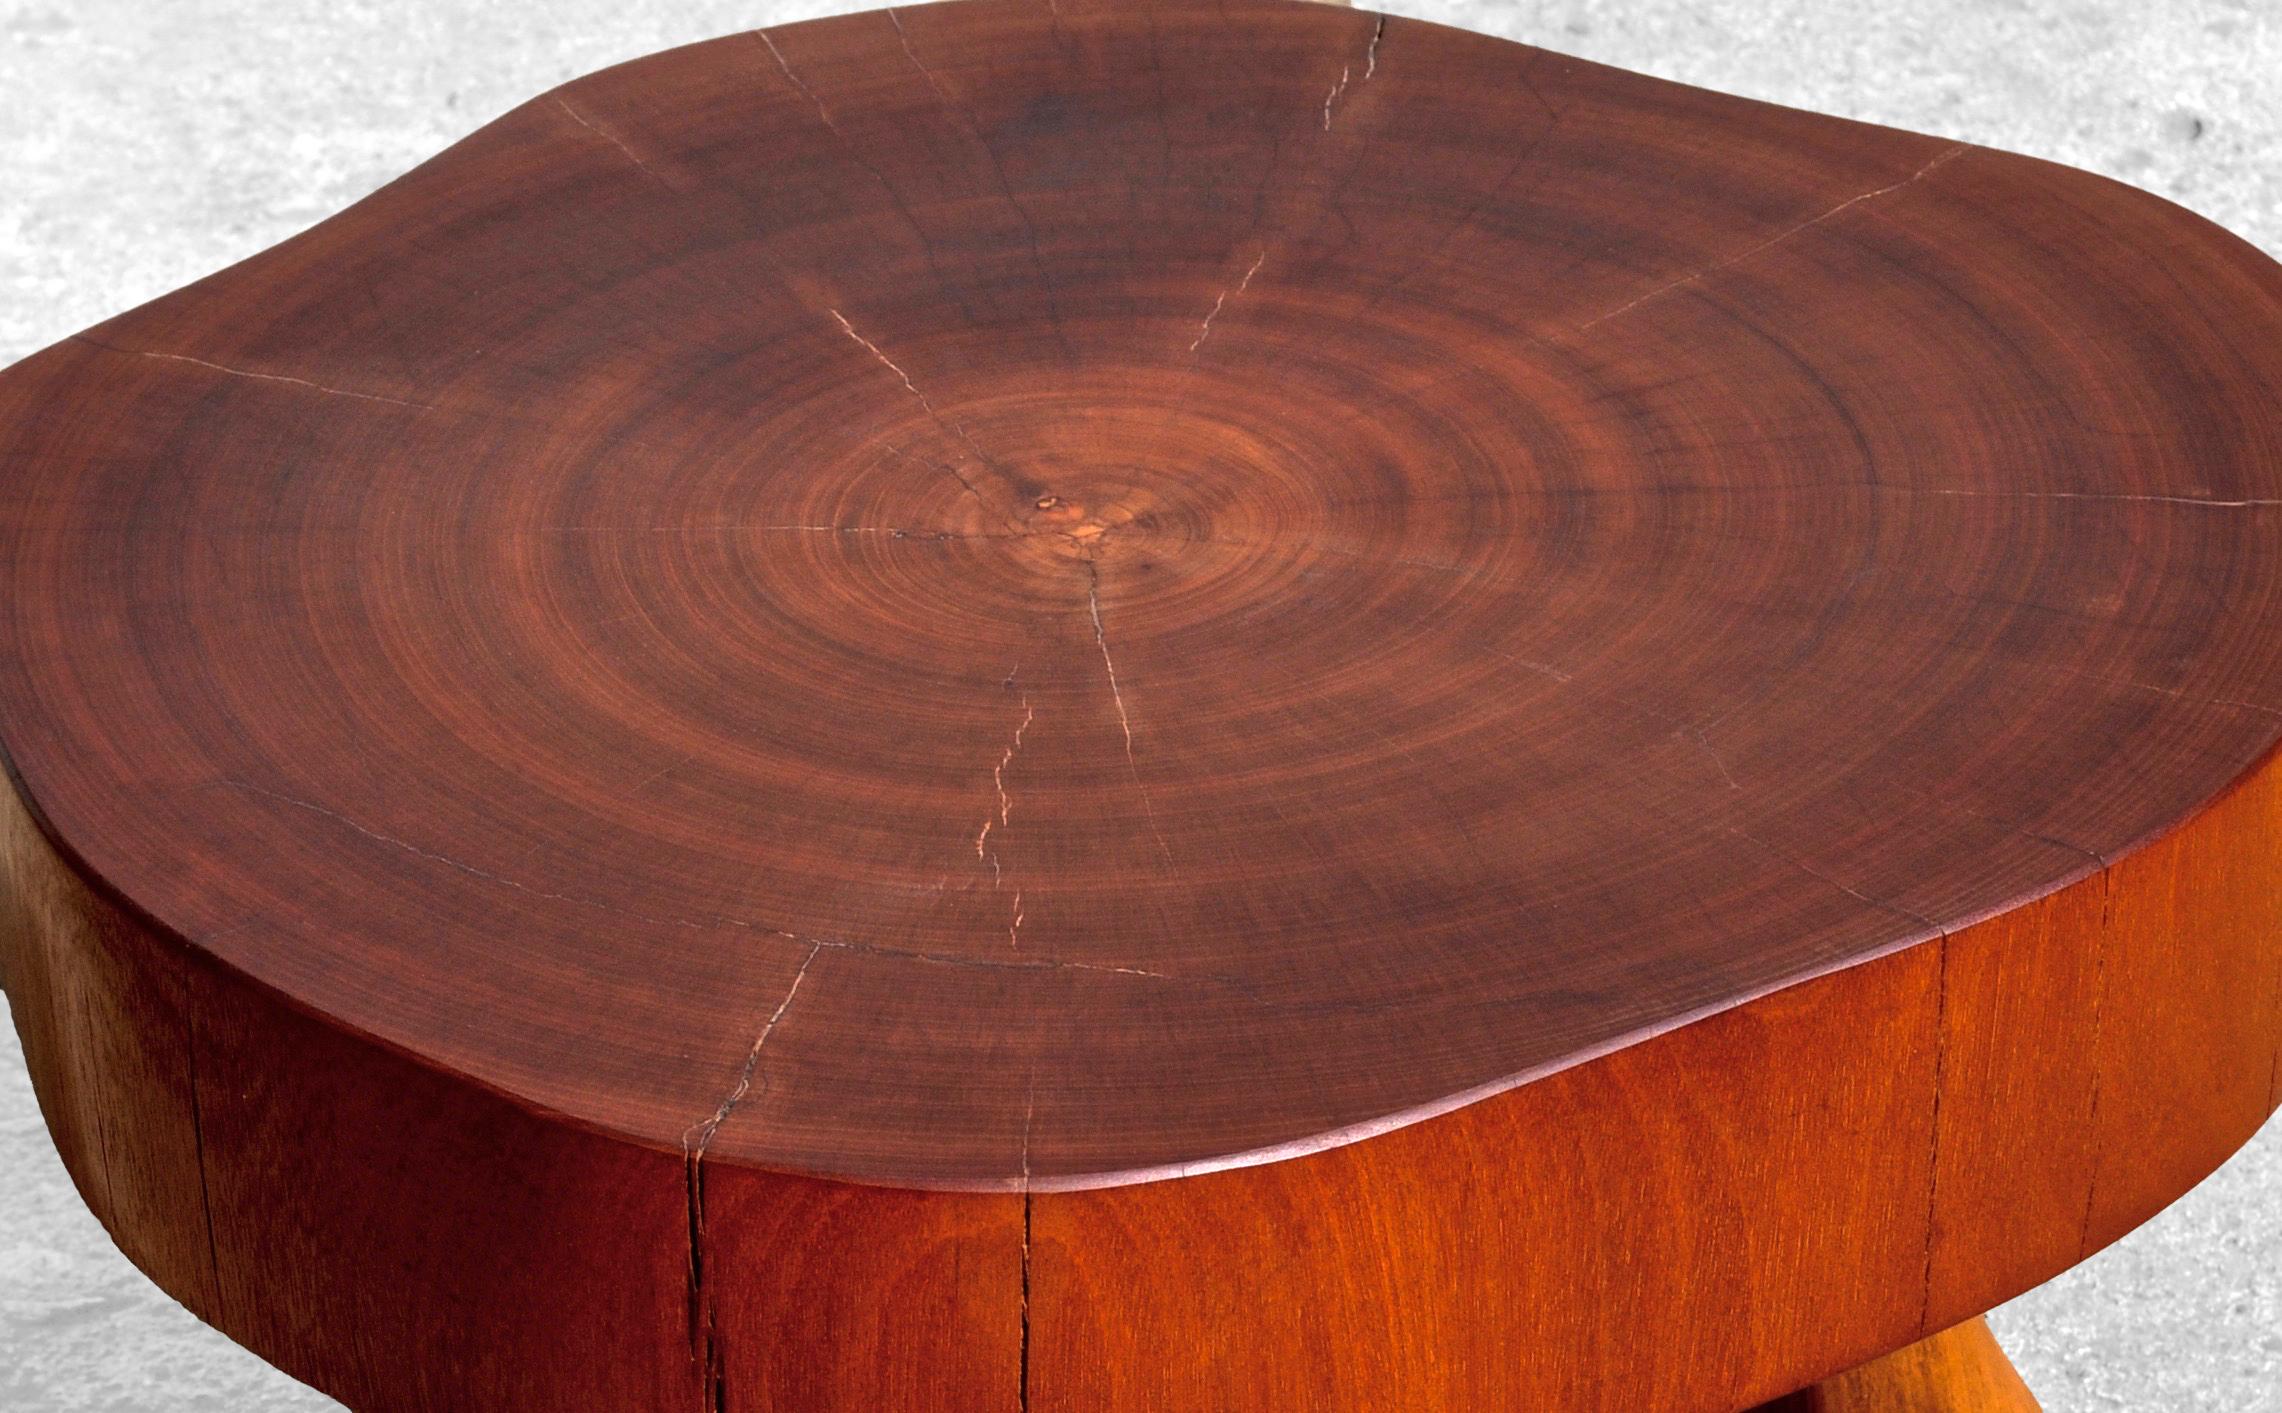 Unique signed table by Jörg Pietschmann
Materials: Padouk, European walnut
Measures: W 64 x D 63 x H 43 cm

In Pietschmann’s sculptures, trees that for centuries were part of a landscape and founded in primordial forces tell stories inscribed in the